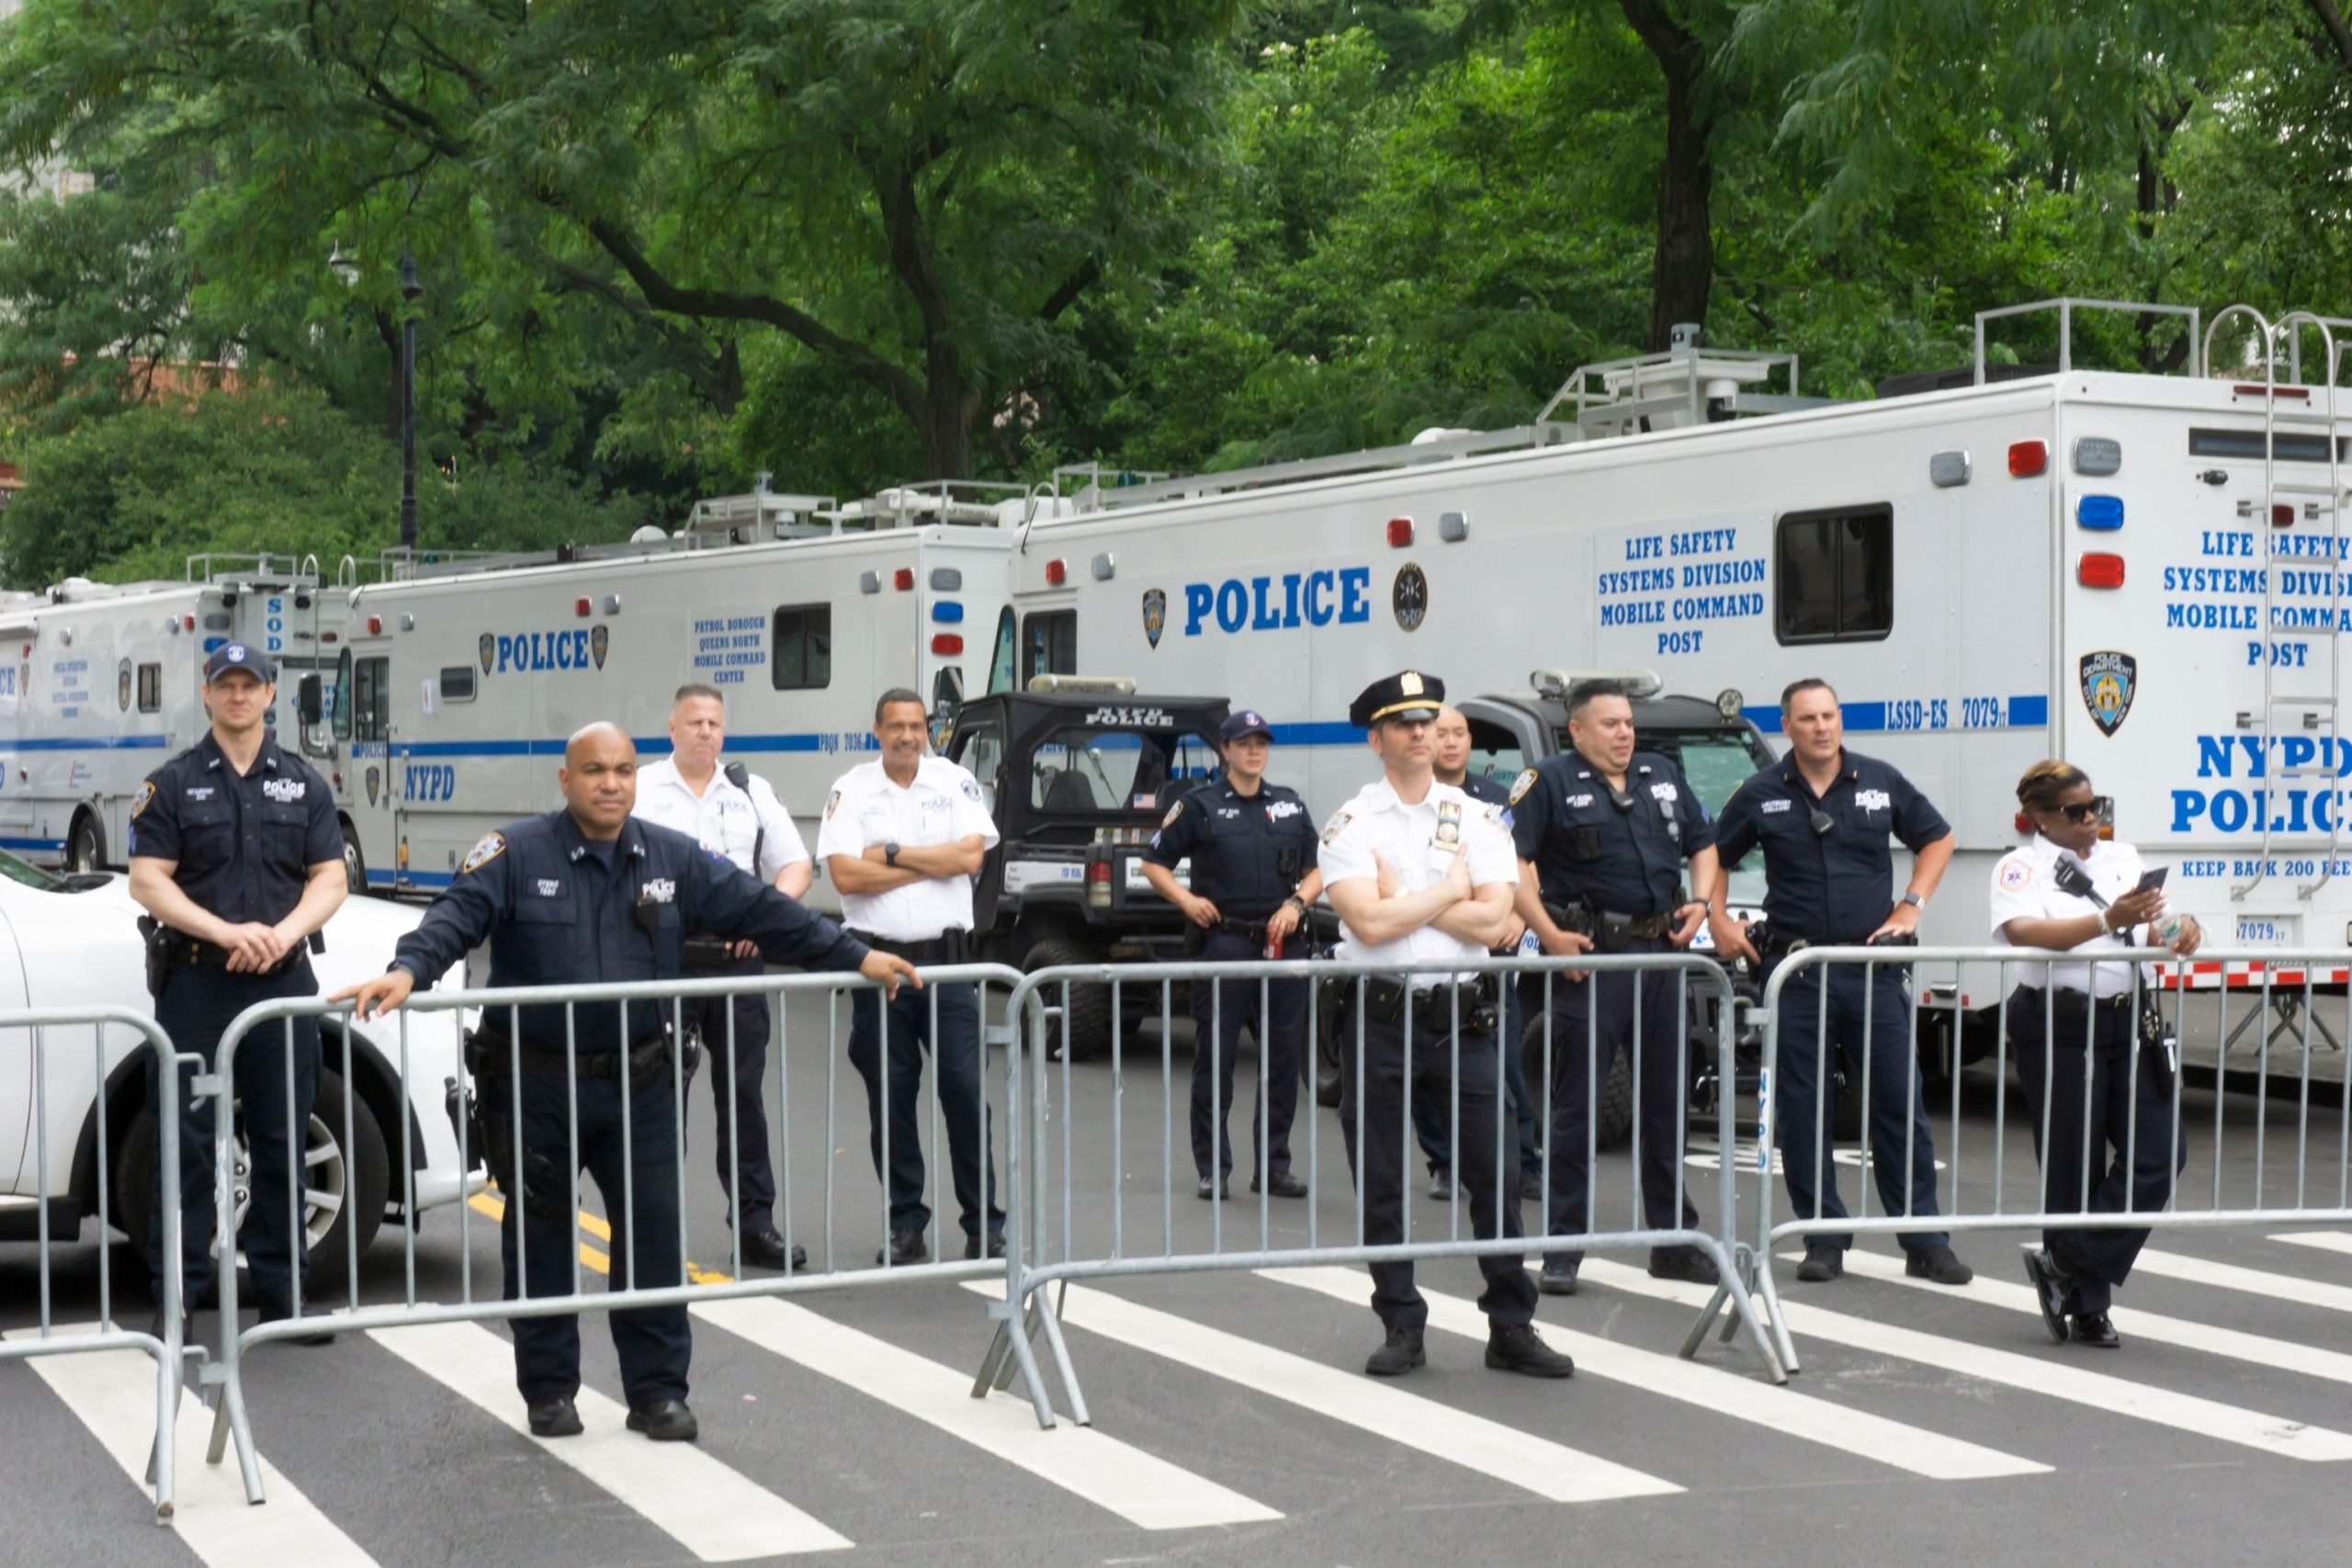 NYPD warns of potential violence targeting Pride march and related events